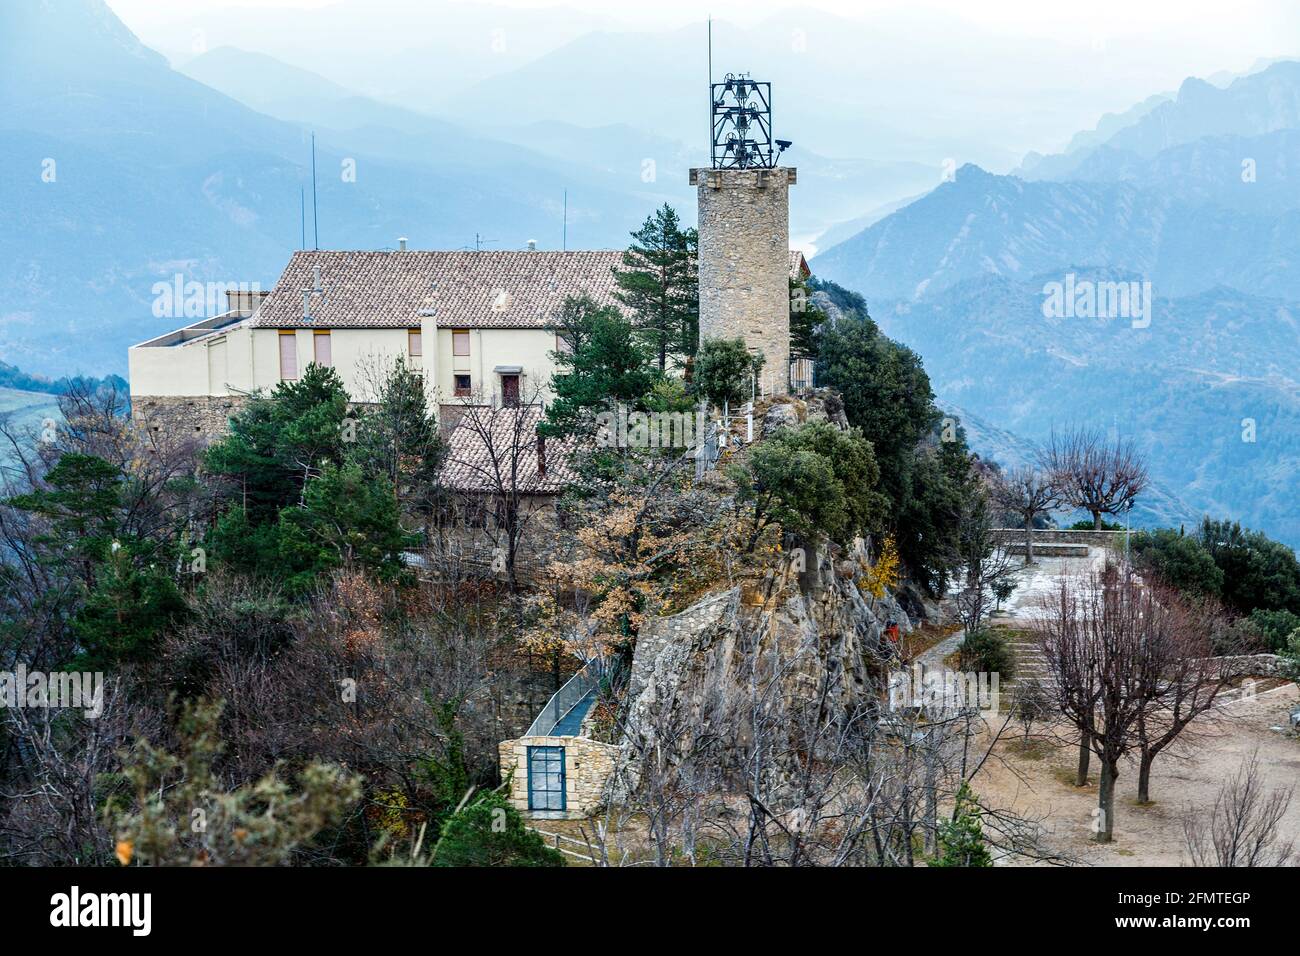 Monastery and Sanctuary of Queralt at Pyrenees. Spain Stock Photo